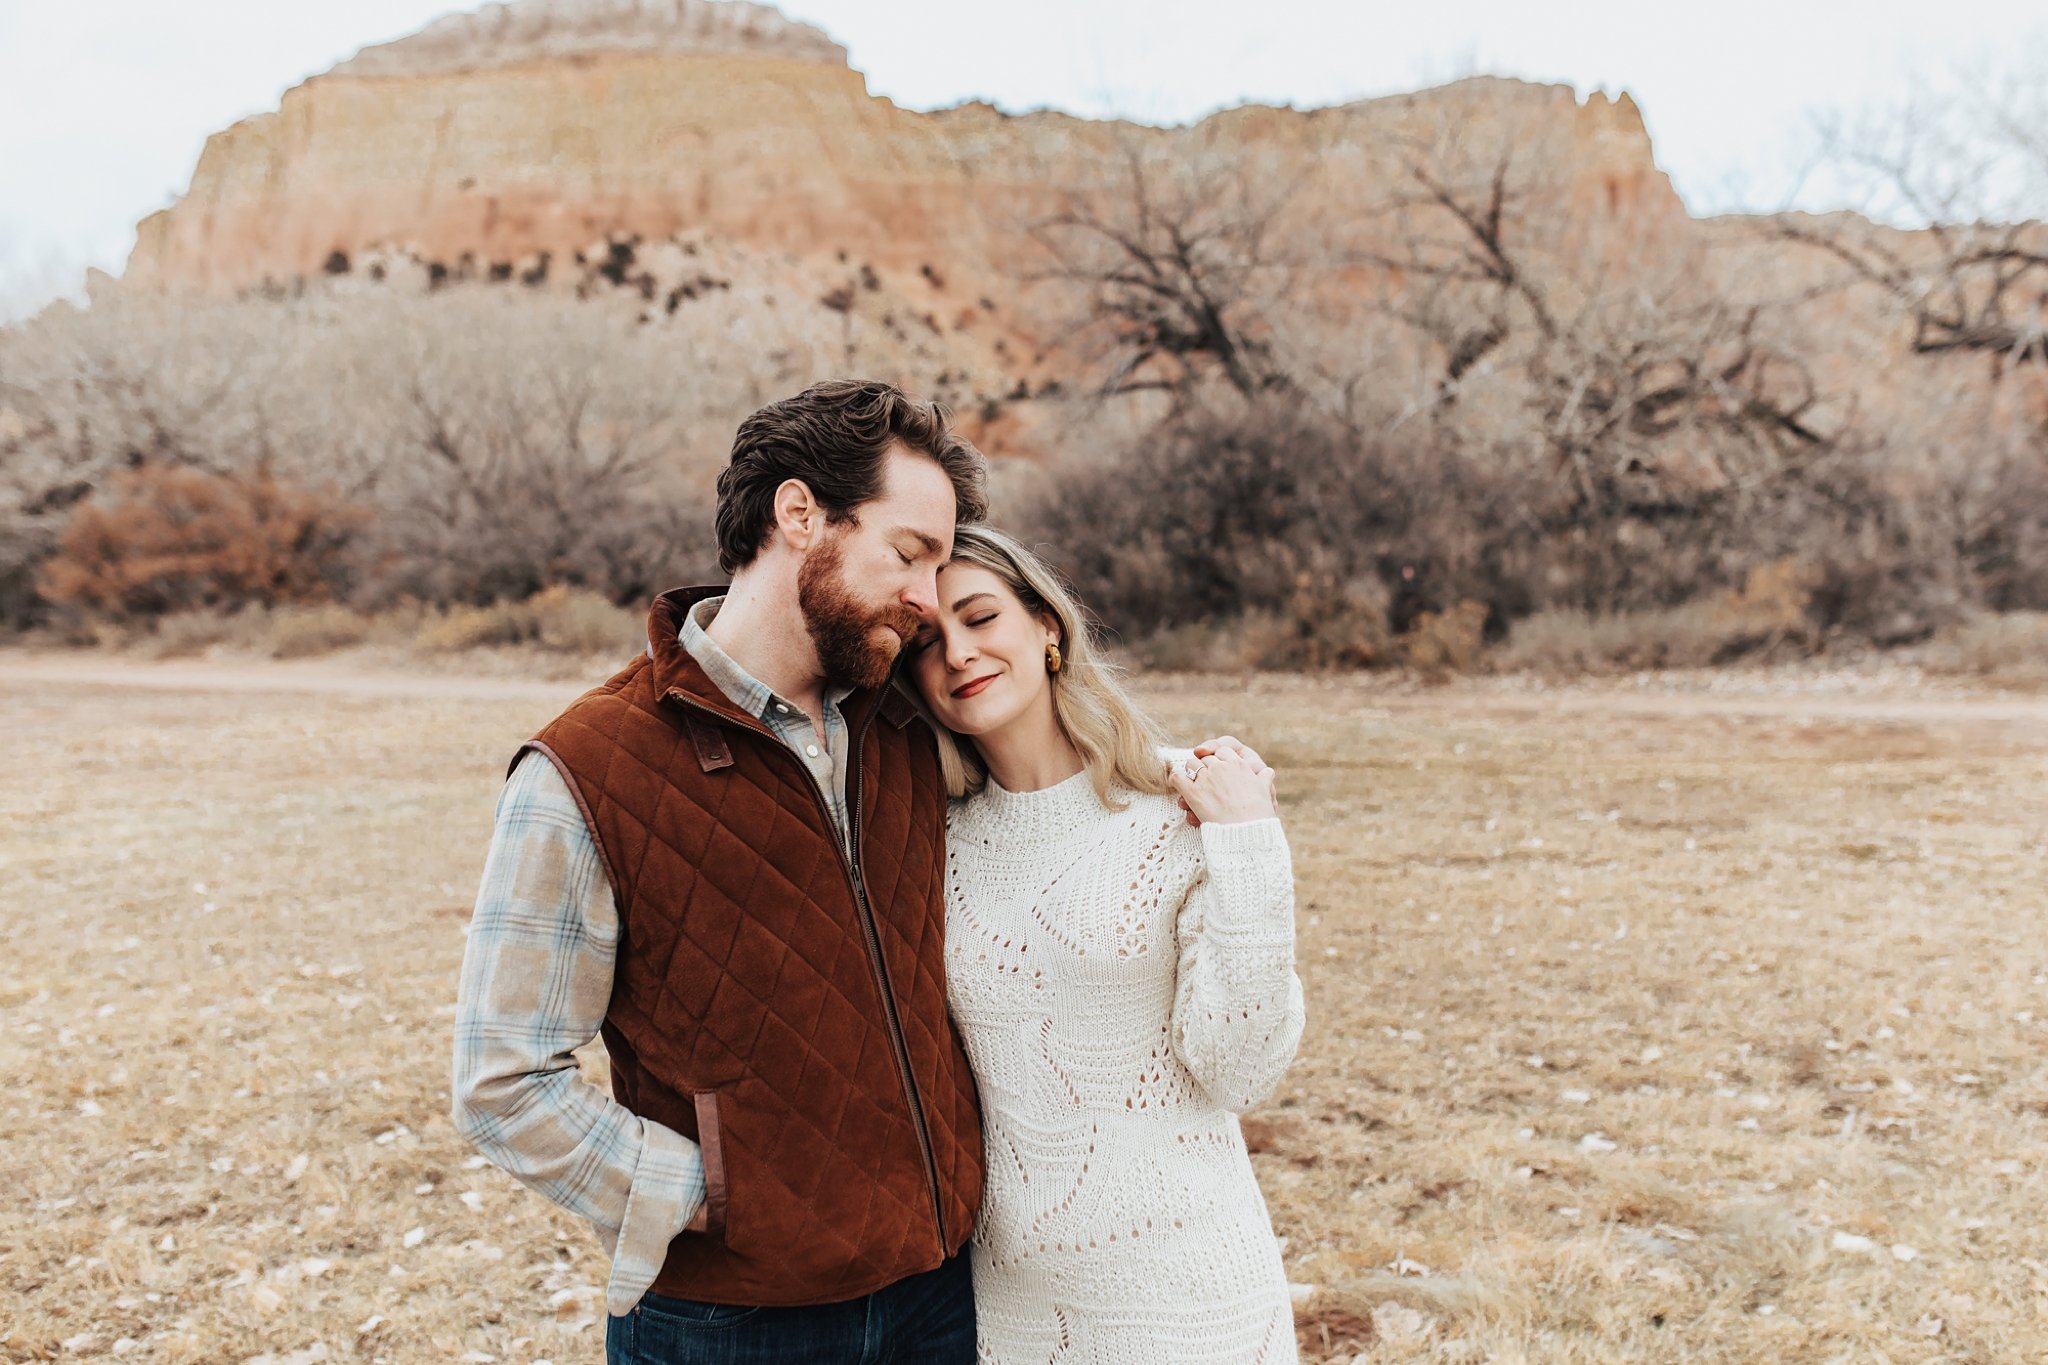 Alicia+lucia+photography+-+albuquerque+wedding+photographer+-+santa+fe+wedding+photography+-+new+mexico+wedding+photographer+-+new+mexico+wedding+-+southwest+engagement+-+ghost+ranch+engagement+-+ghost+ranch+wedding_0034.jpg